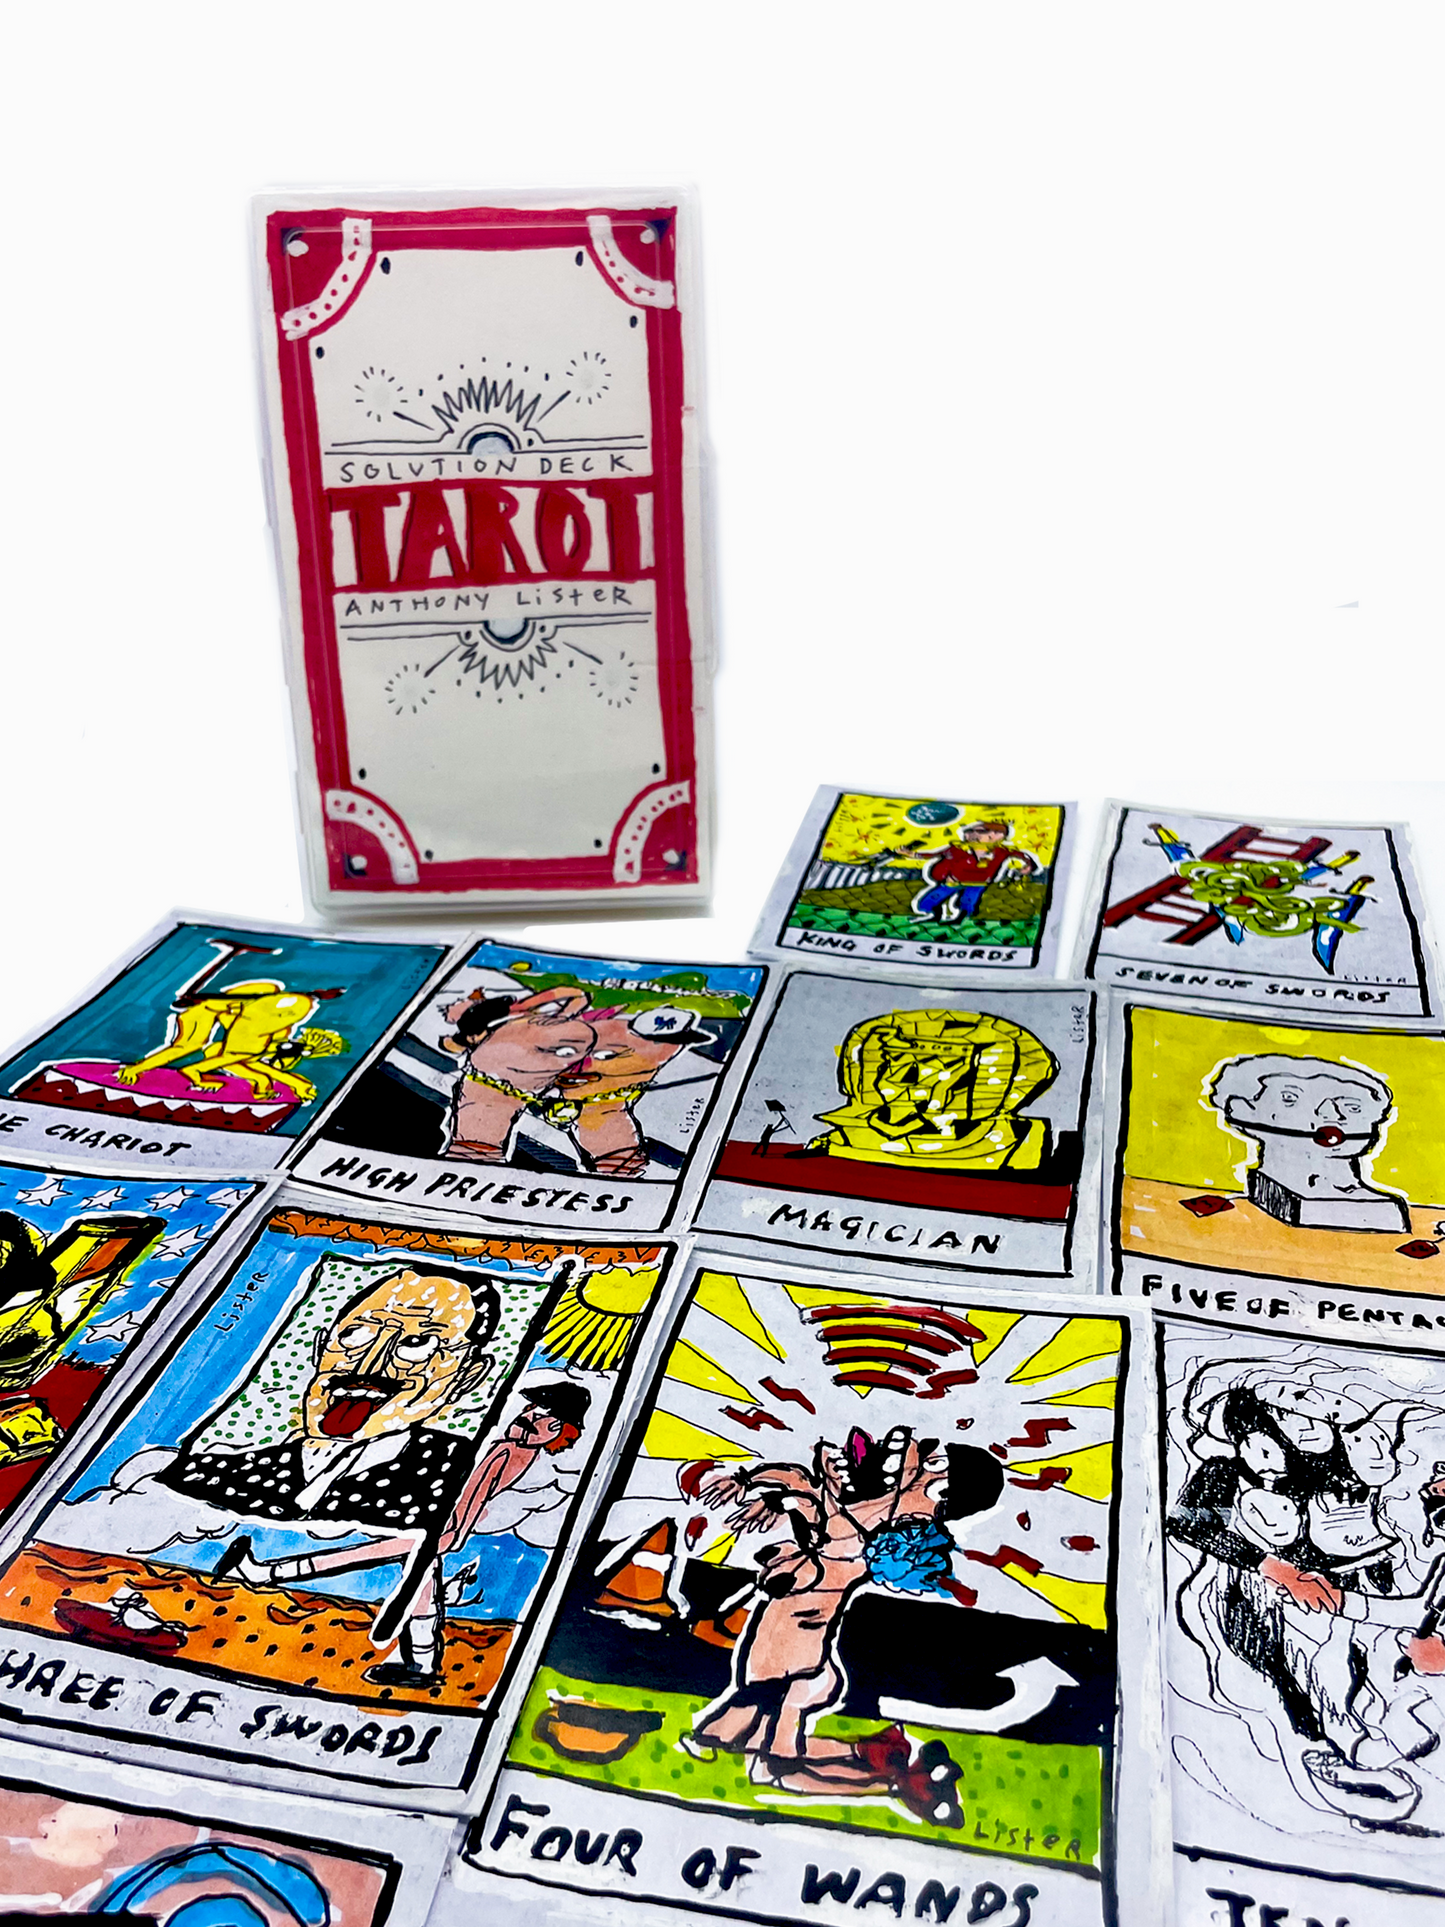 
                  
                    TAROT - Solution Deck by Anthony LISTER
                  
                